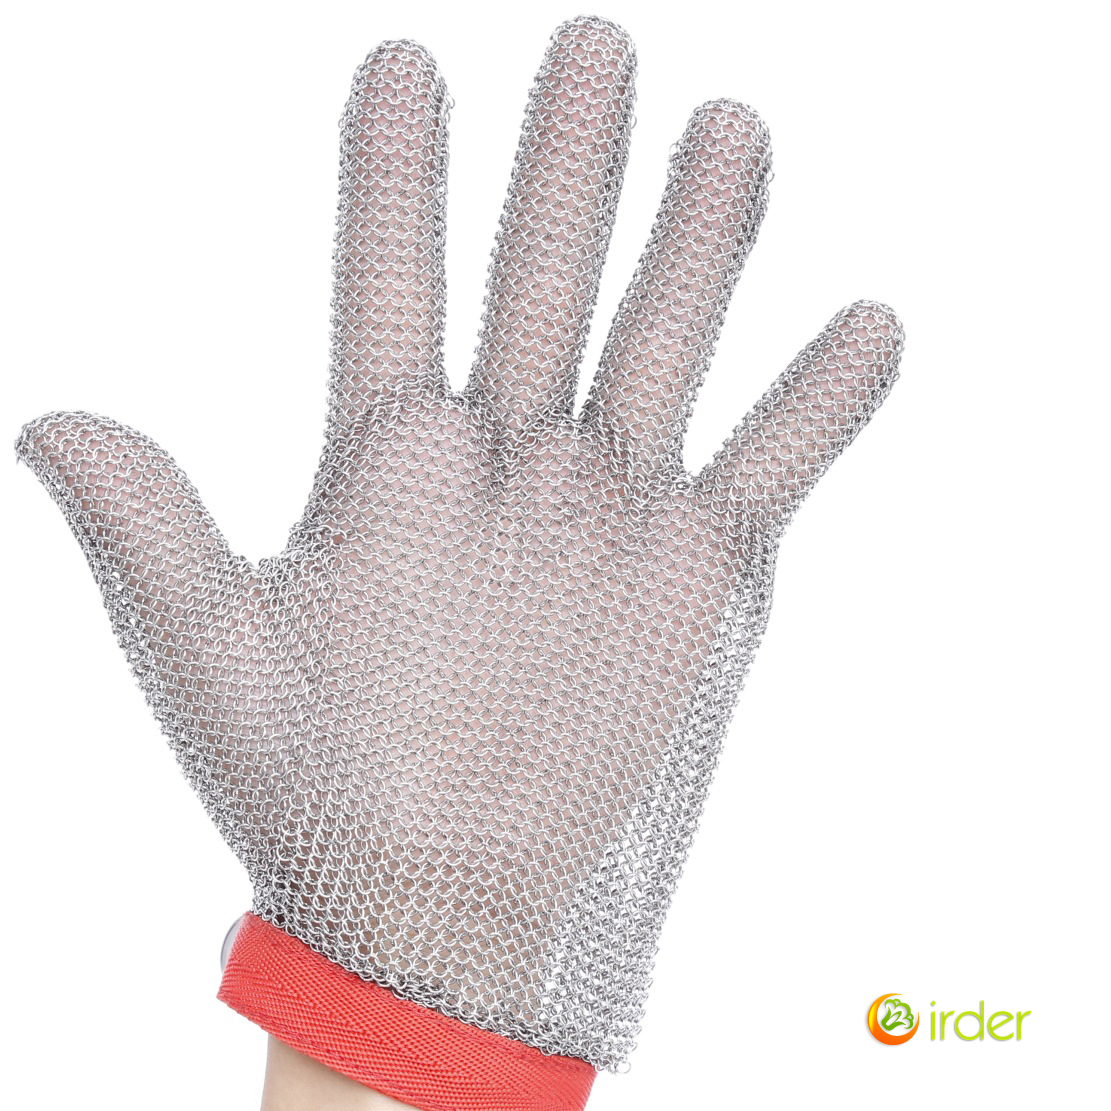 316L stainless steel gloves safty protective gloves meet factory